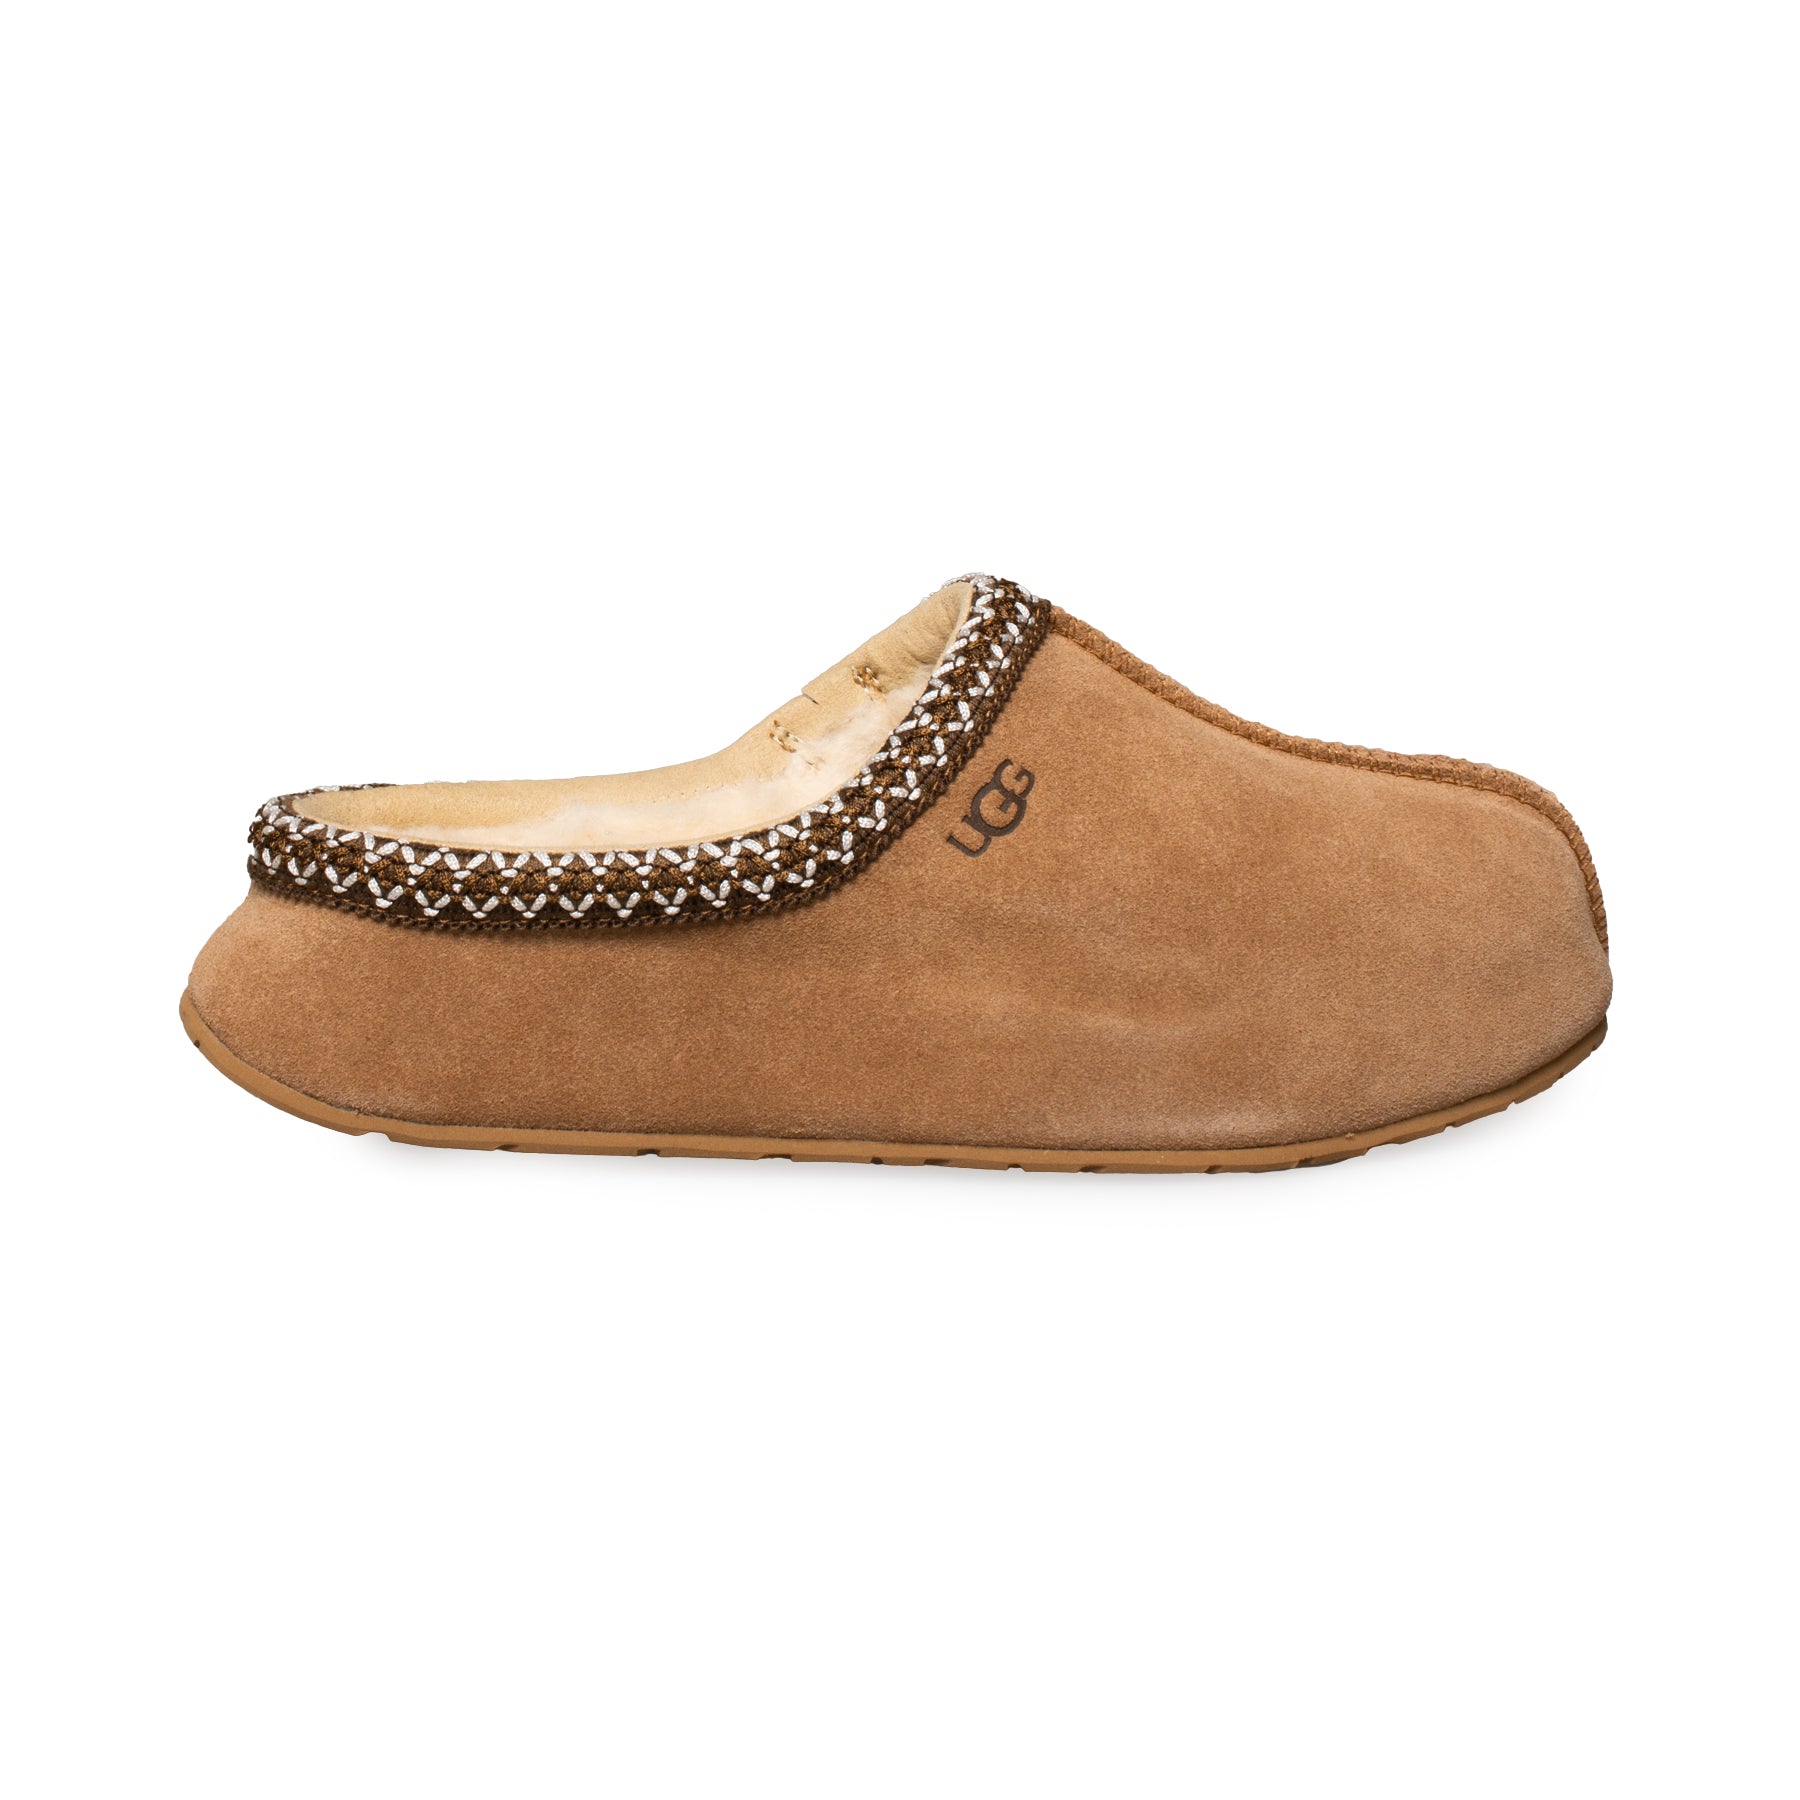 UGG Women's Tasman Suede Braid Accent Embroidered Clog Slippers